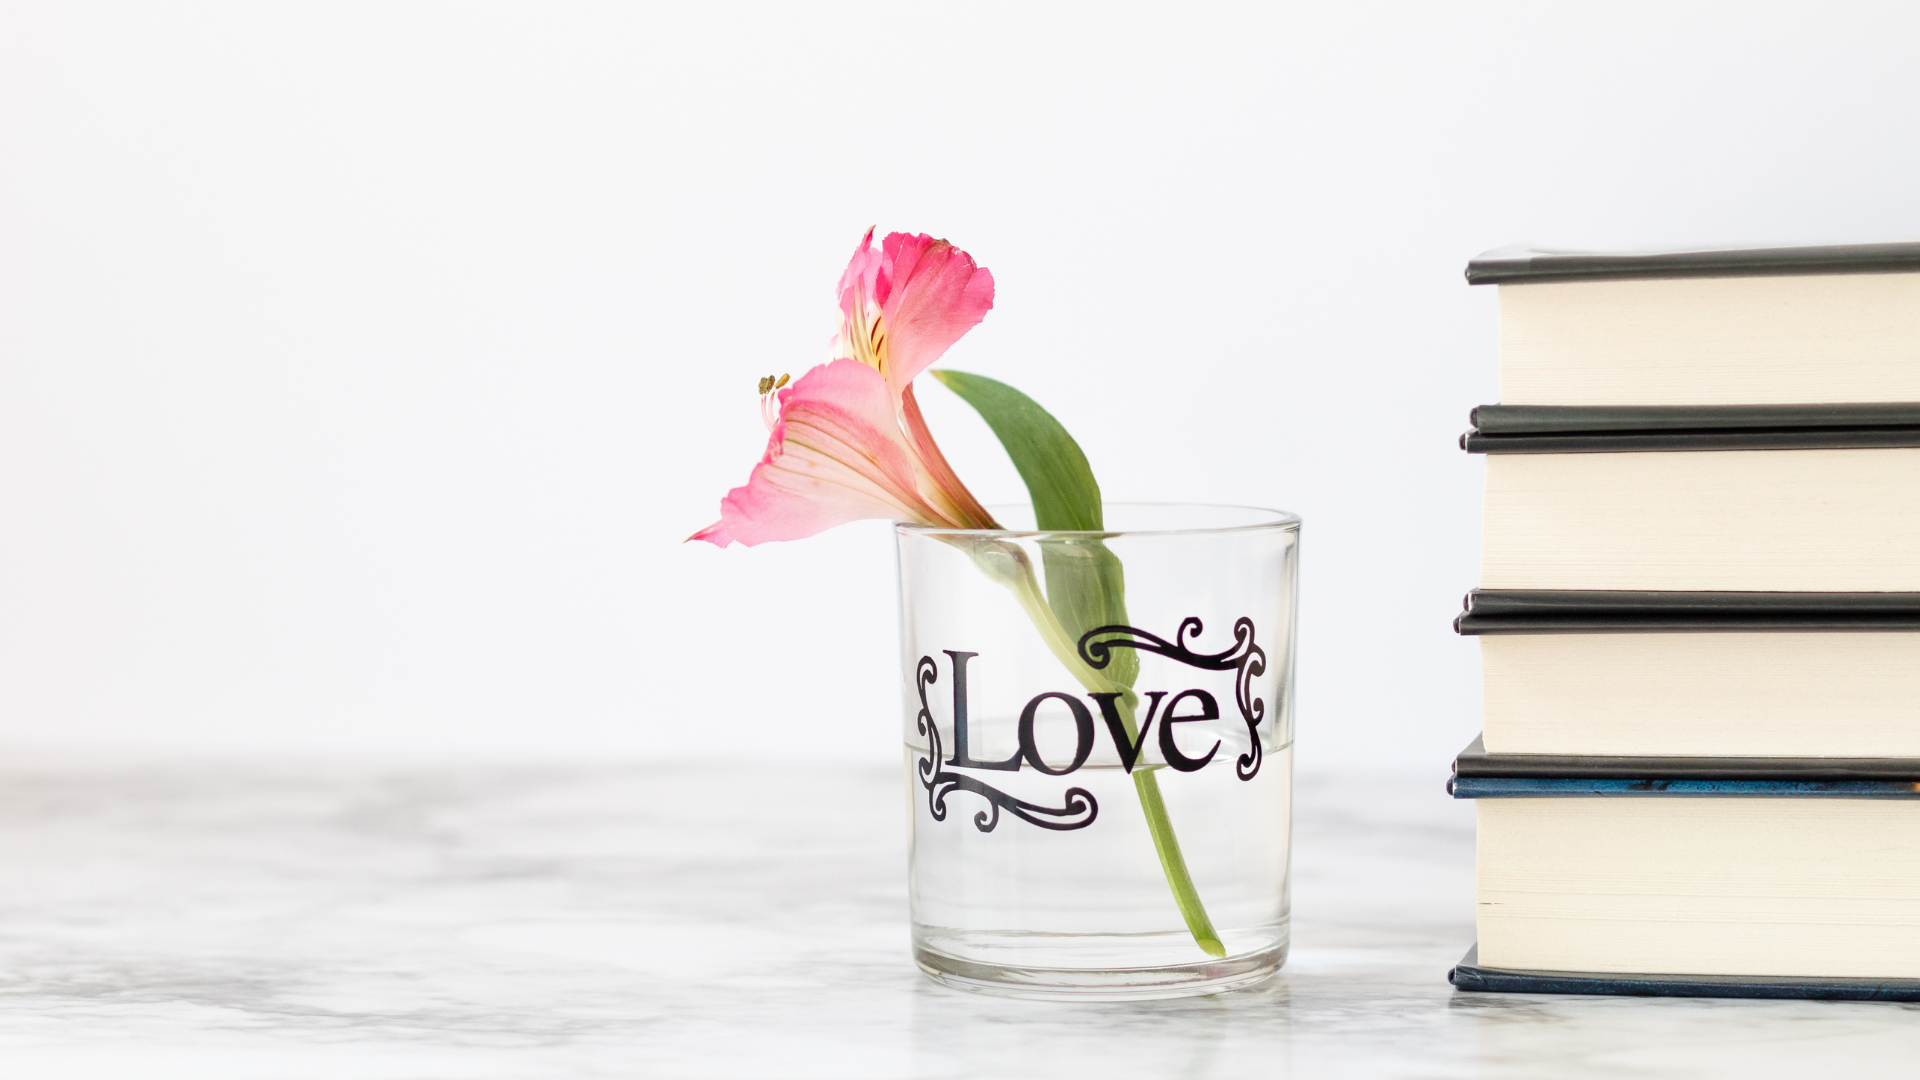 stack of books next to a glass cup containing a flower